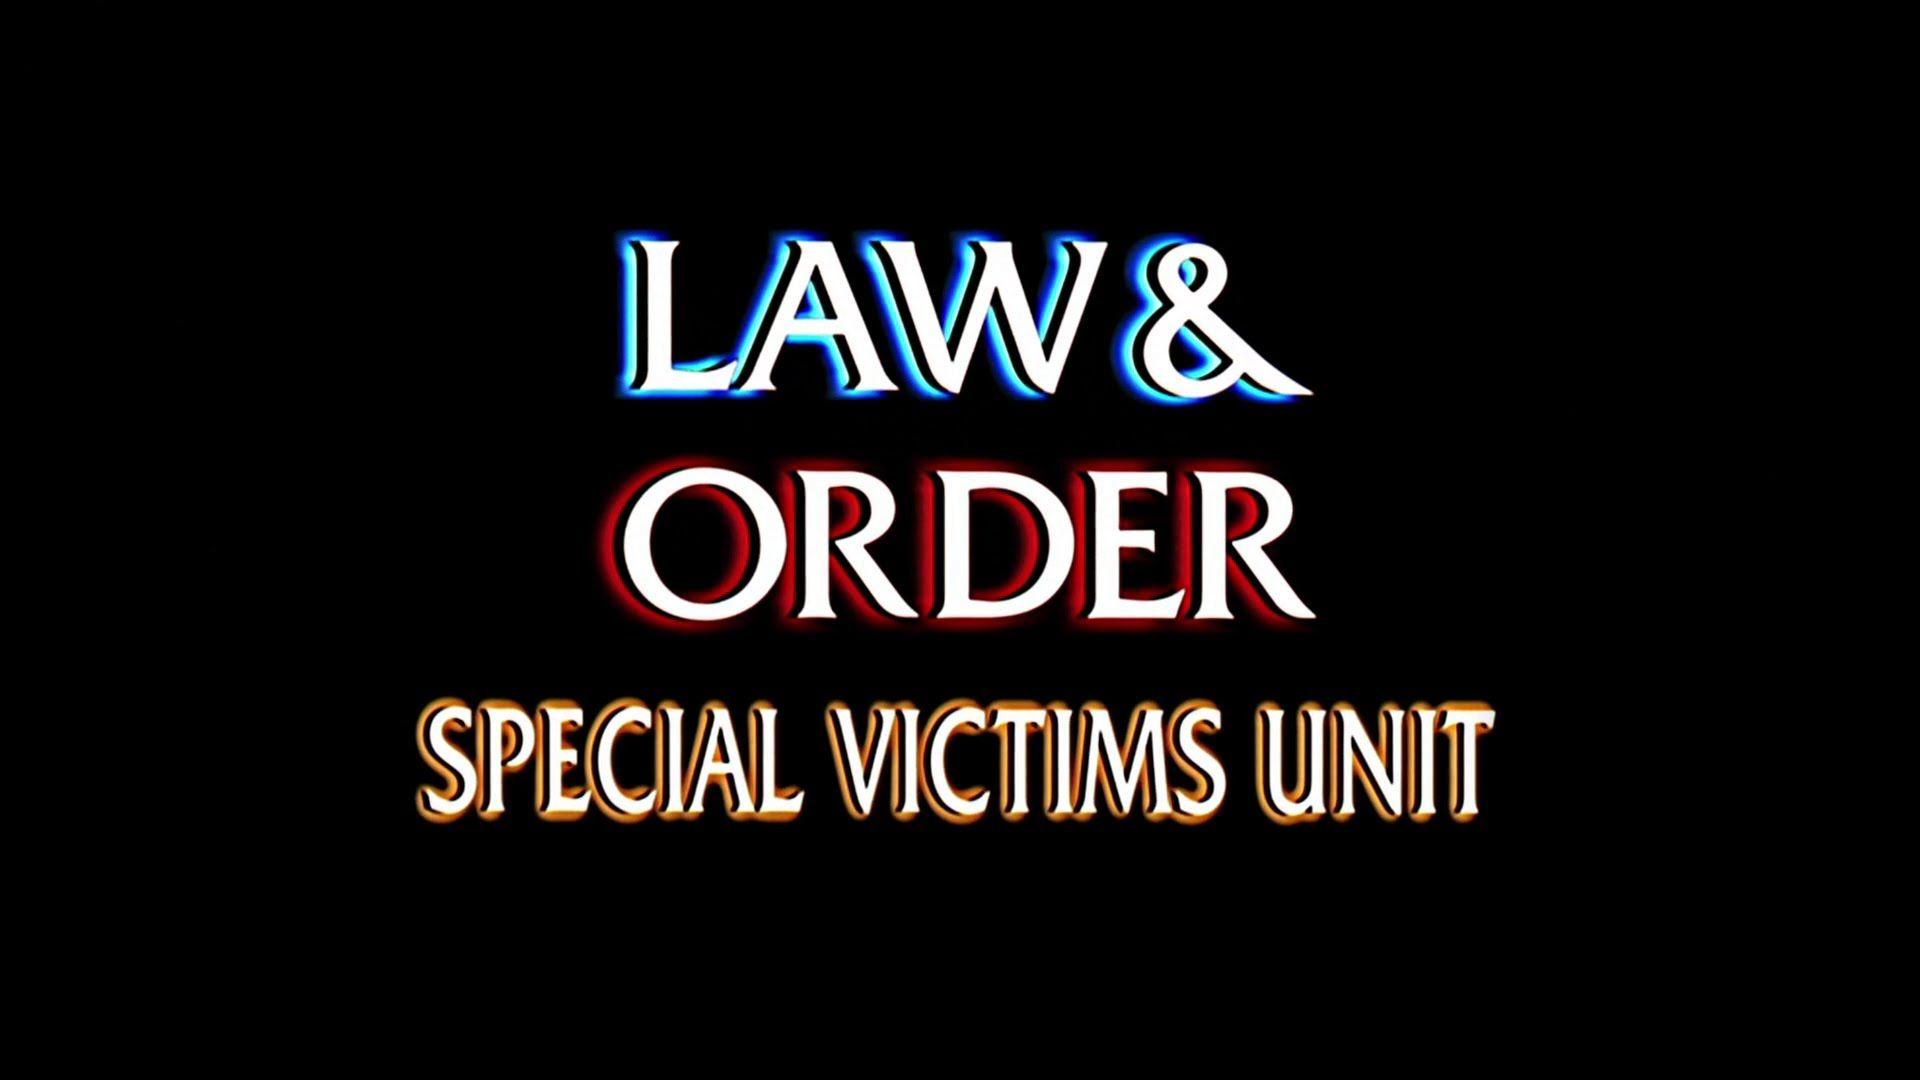 Law & Order Sound Effect (For 1 Hour!)